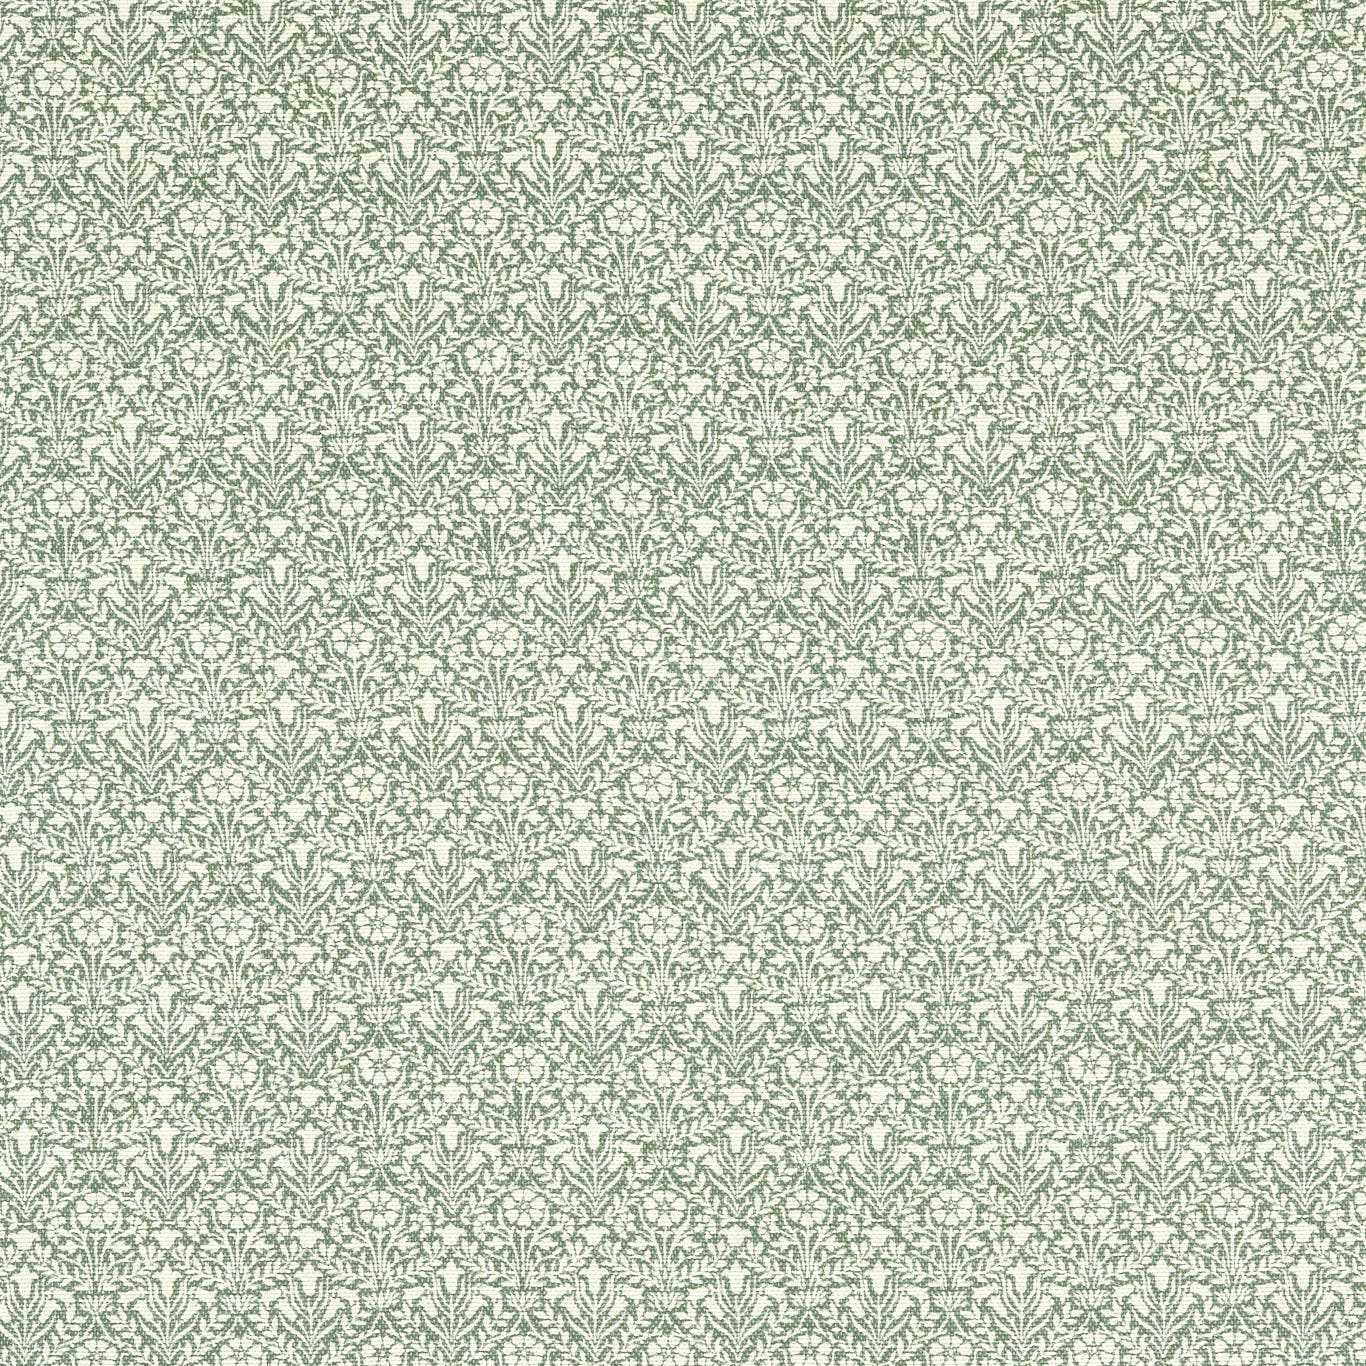 Bellflowers Weave Seagreen Fabric by MOR